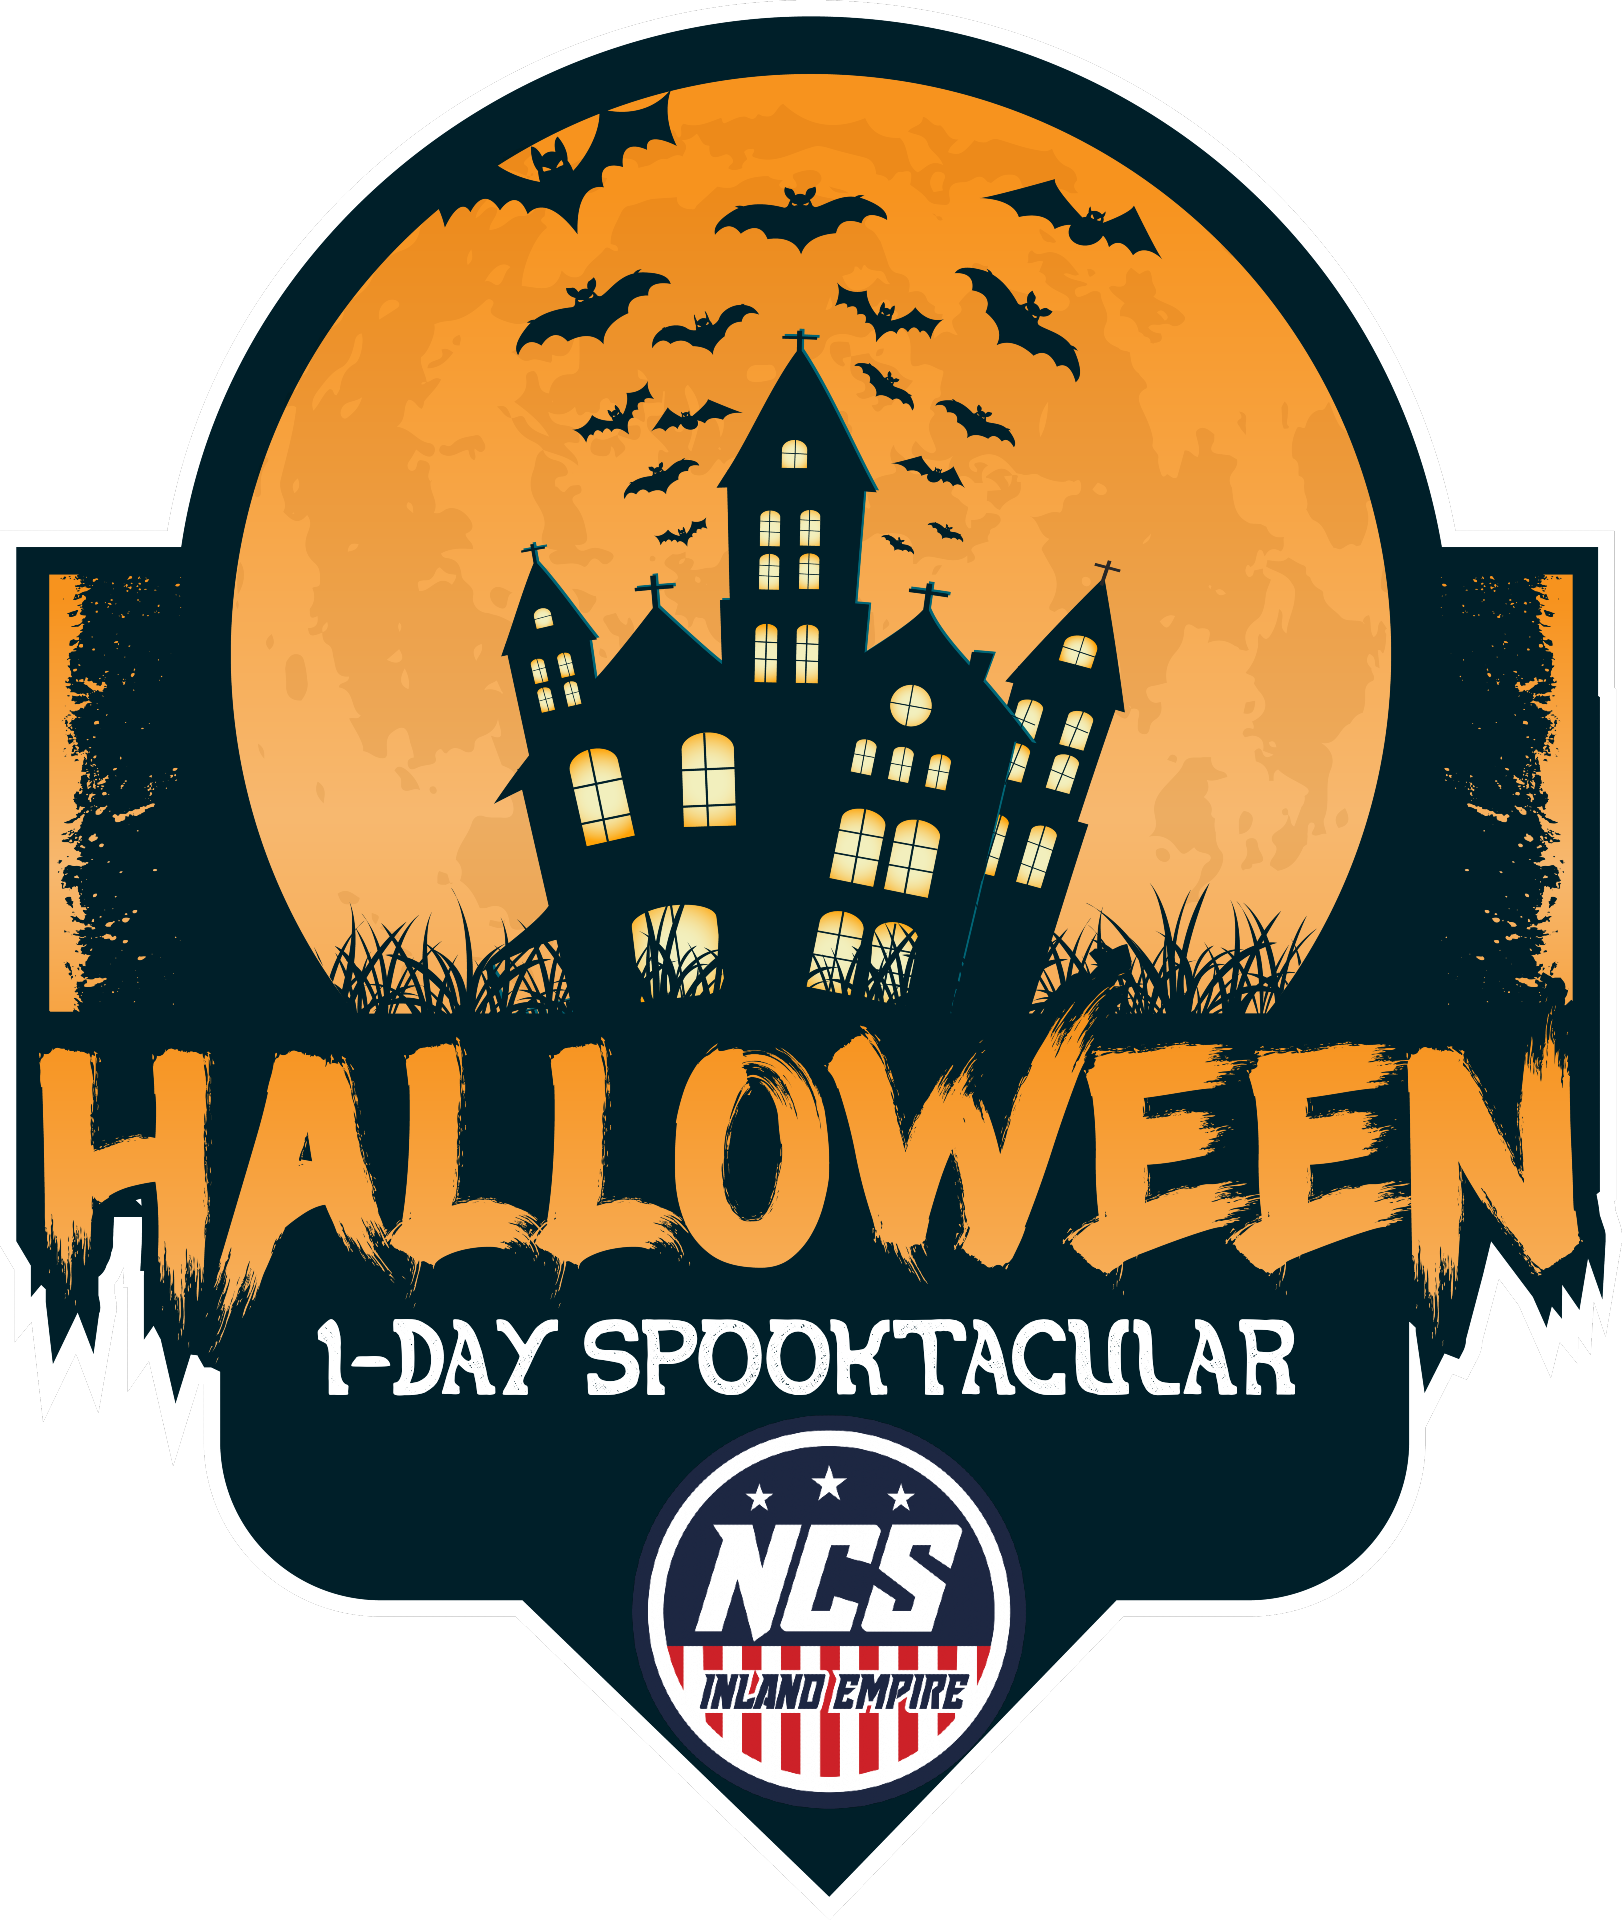 1-DAY NCS Spooktacular WEAR COSTUMES / TRICK OR TREAT! Logo